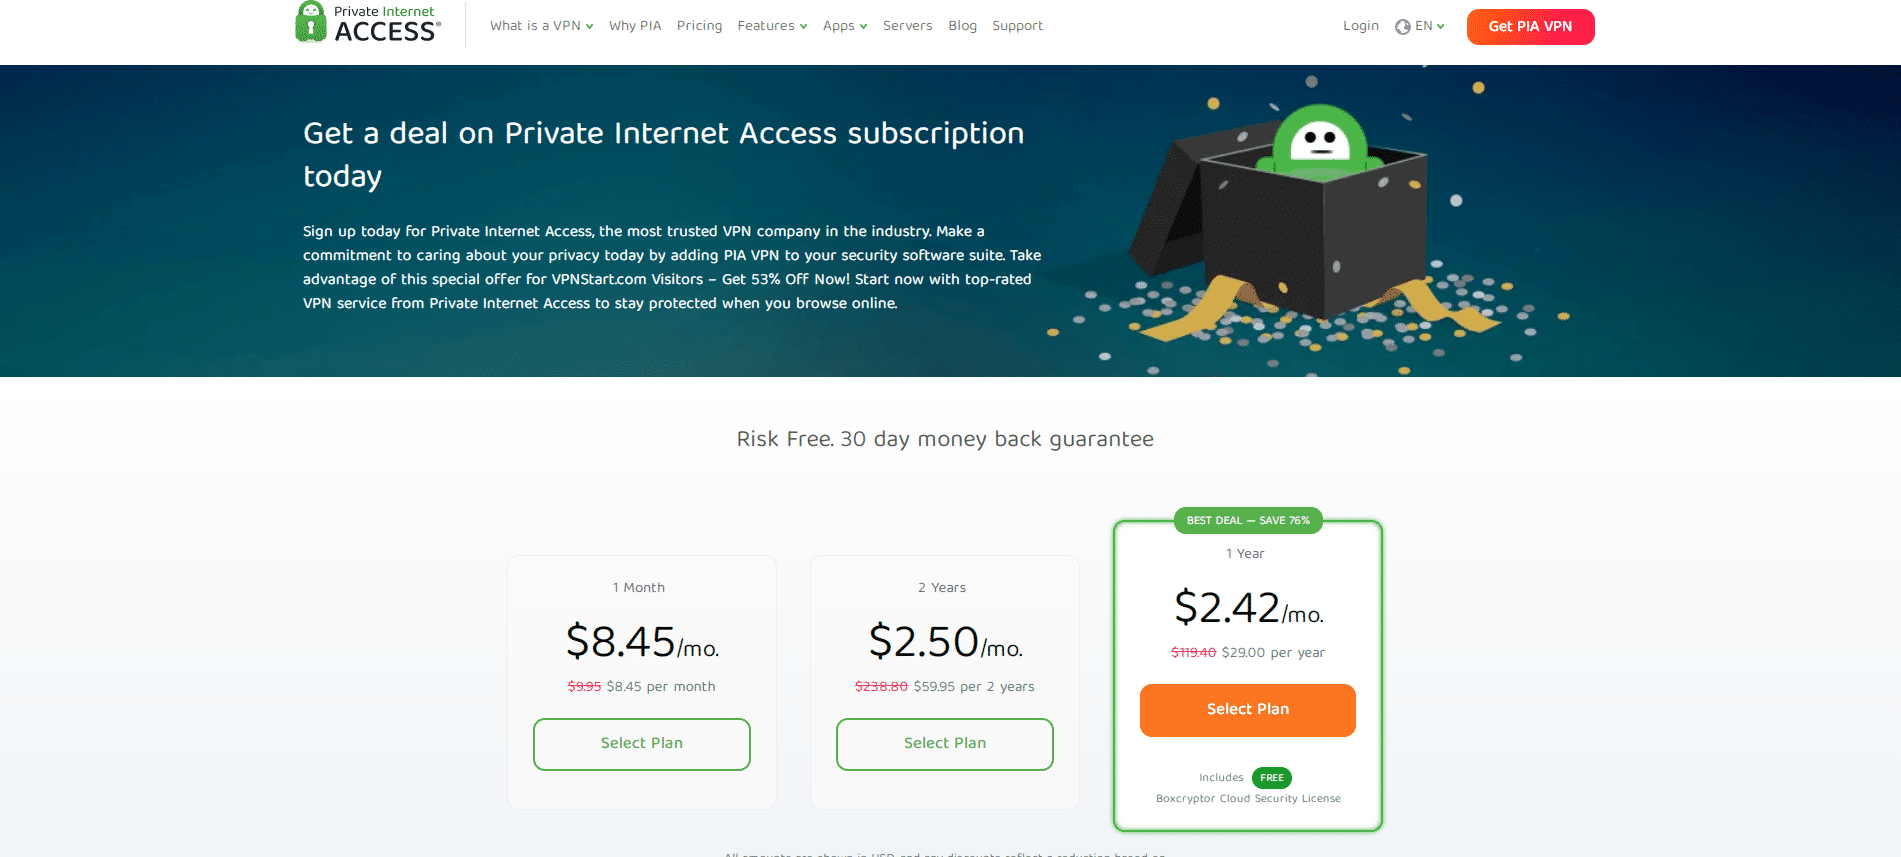 Get a deal on Private Internet Access subscription today